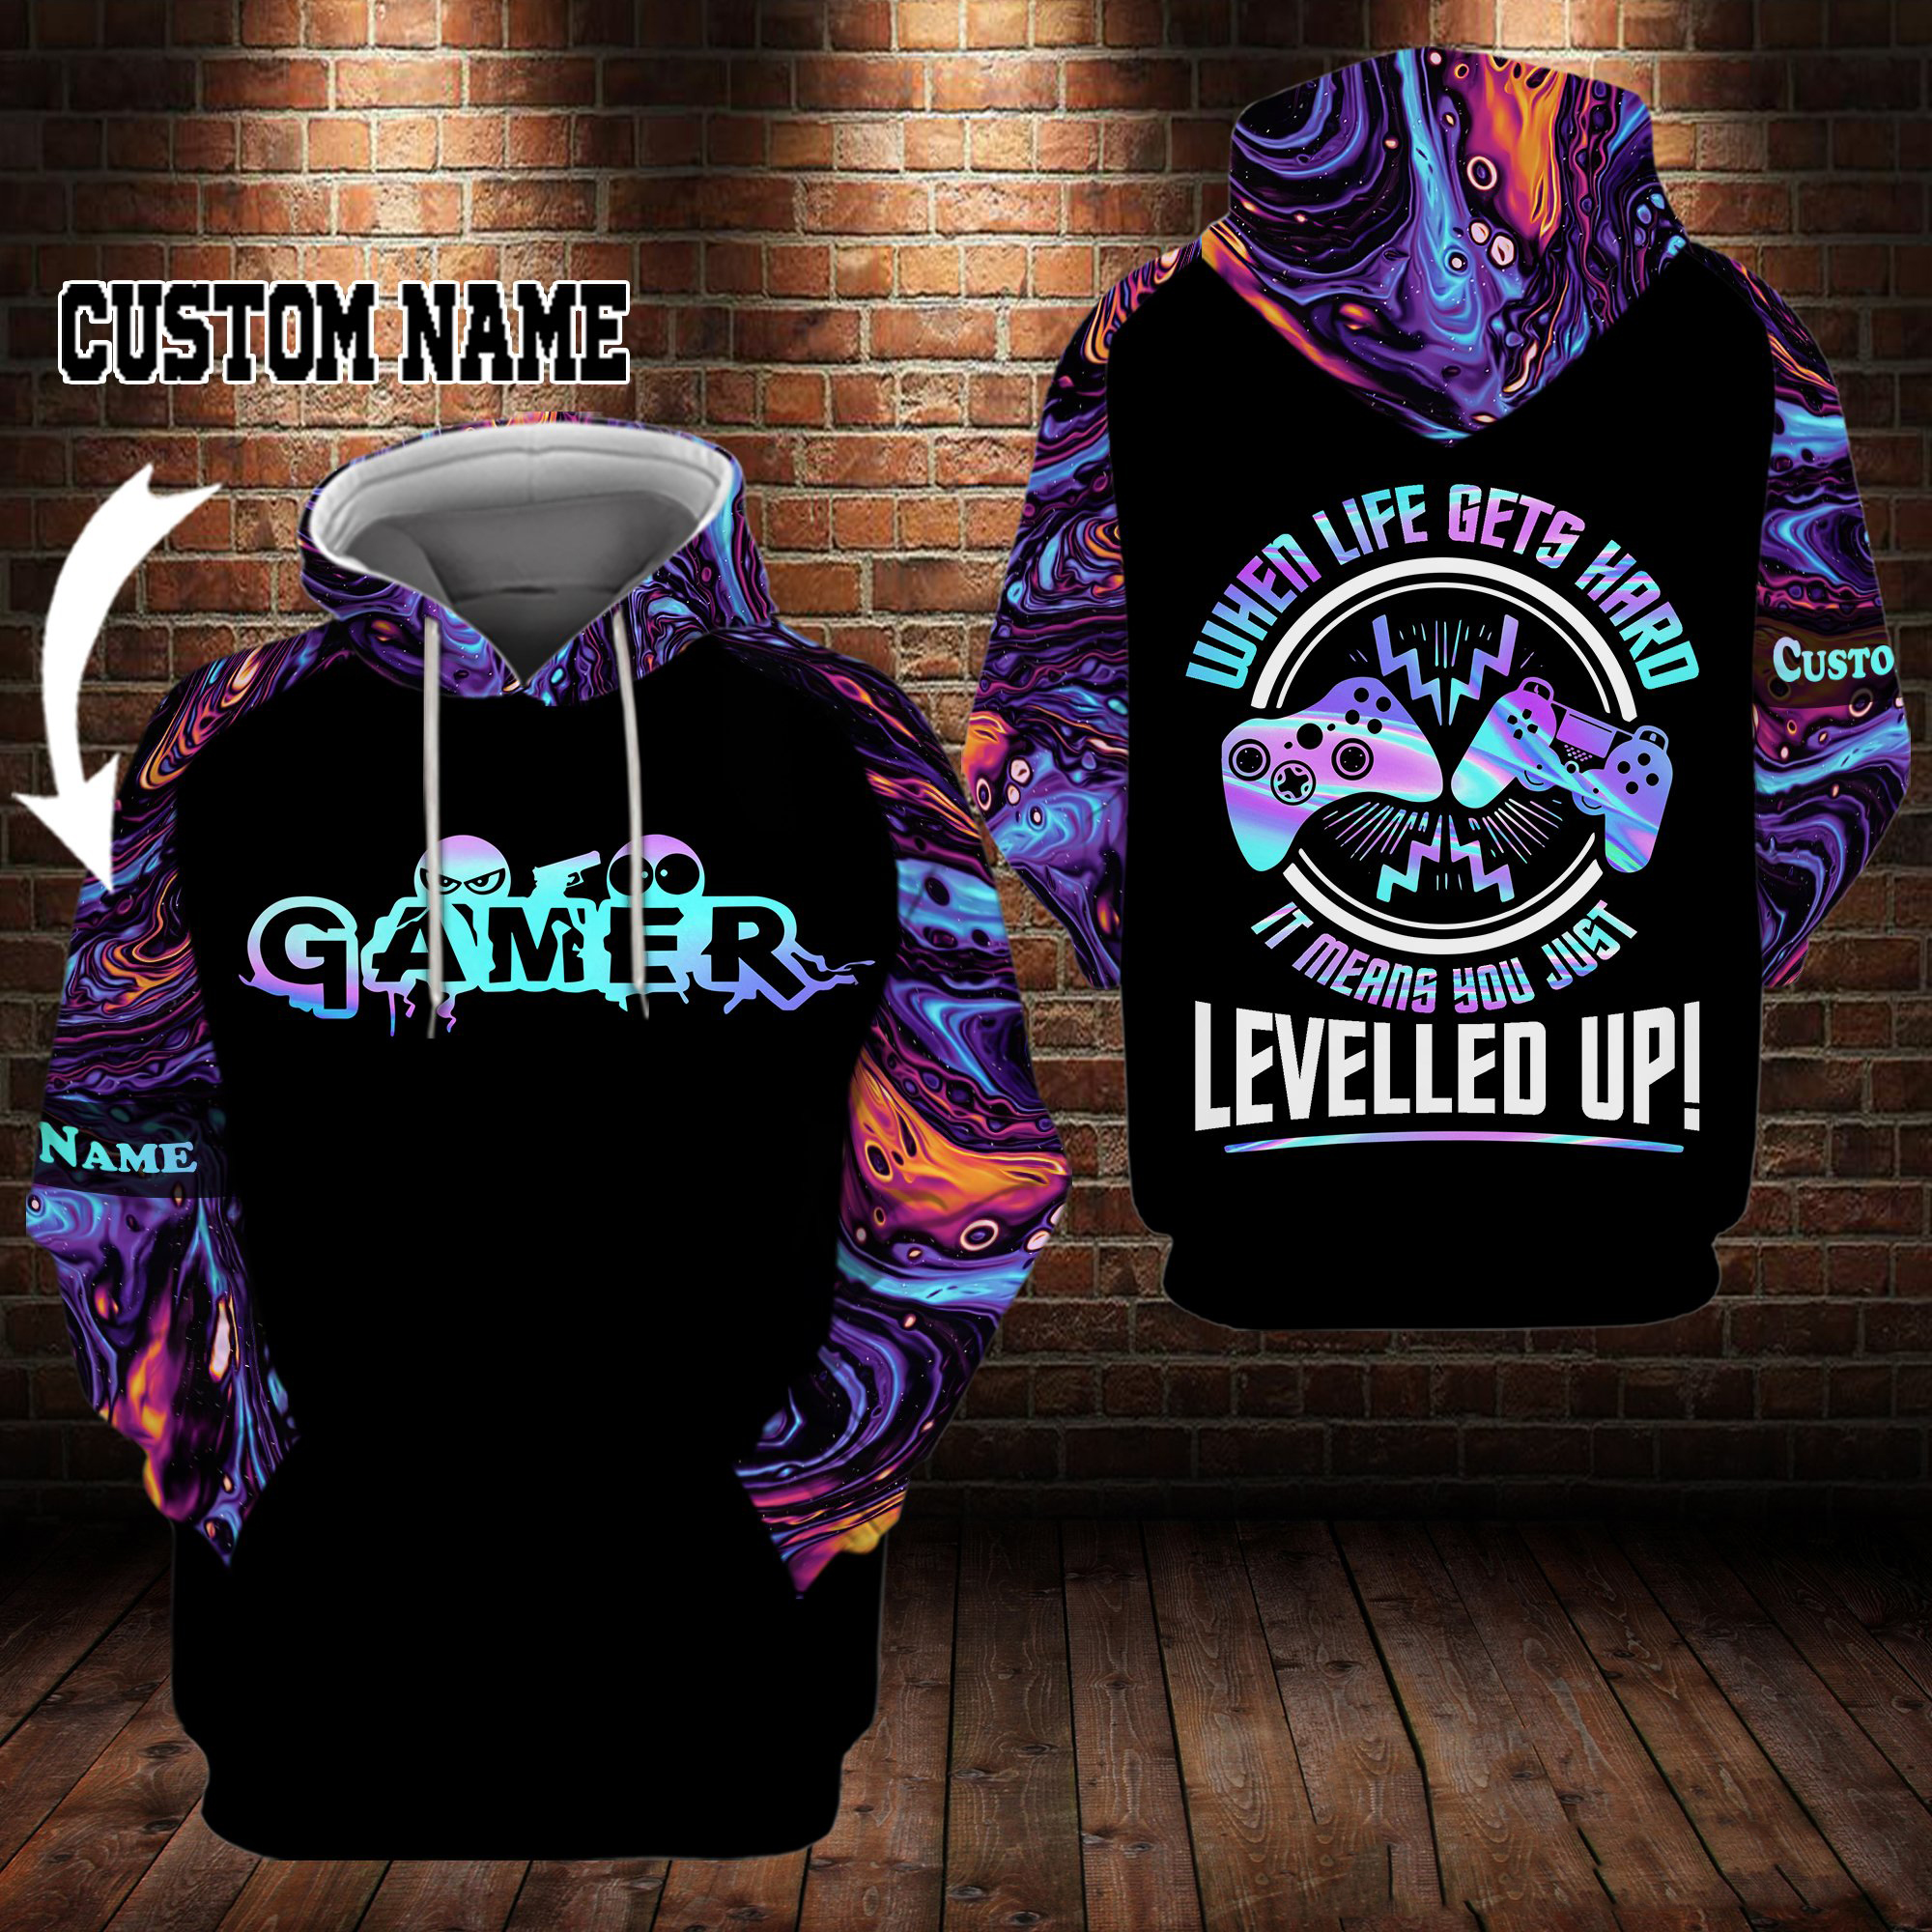 Gamer When life gets hard it means you just levelled up personalized custom name 3d hoodie